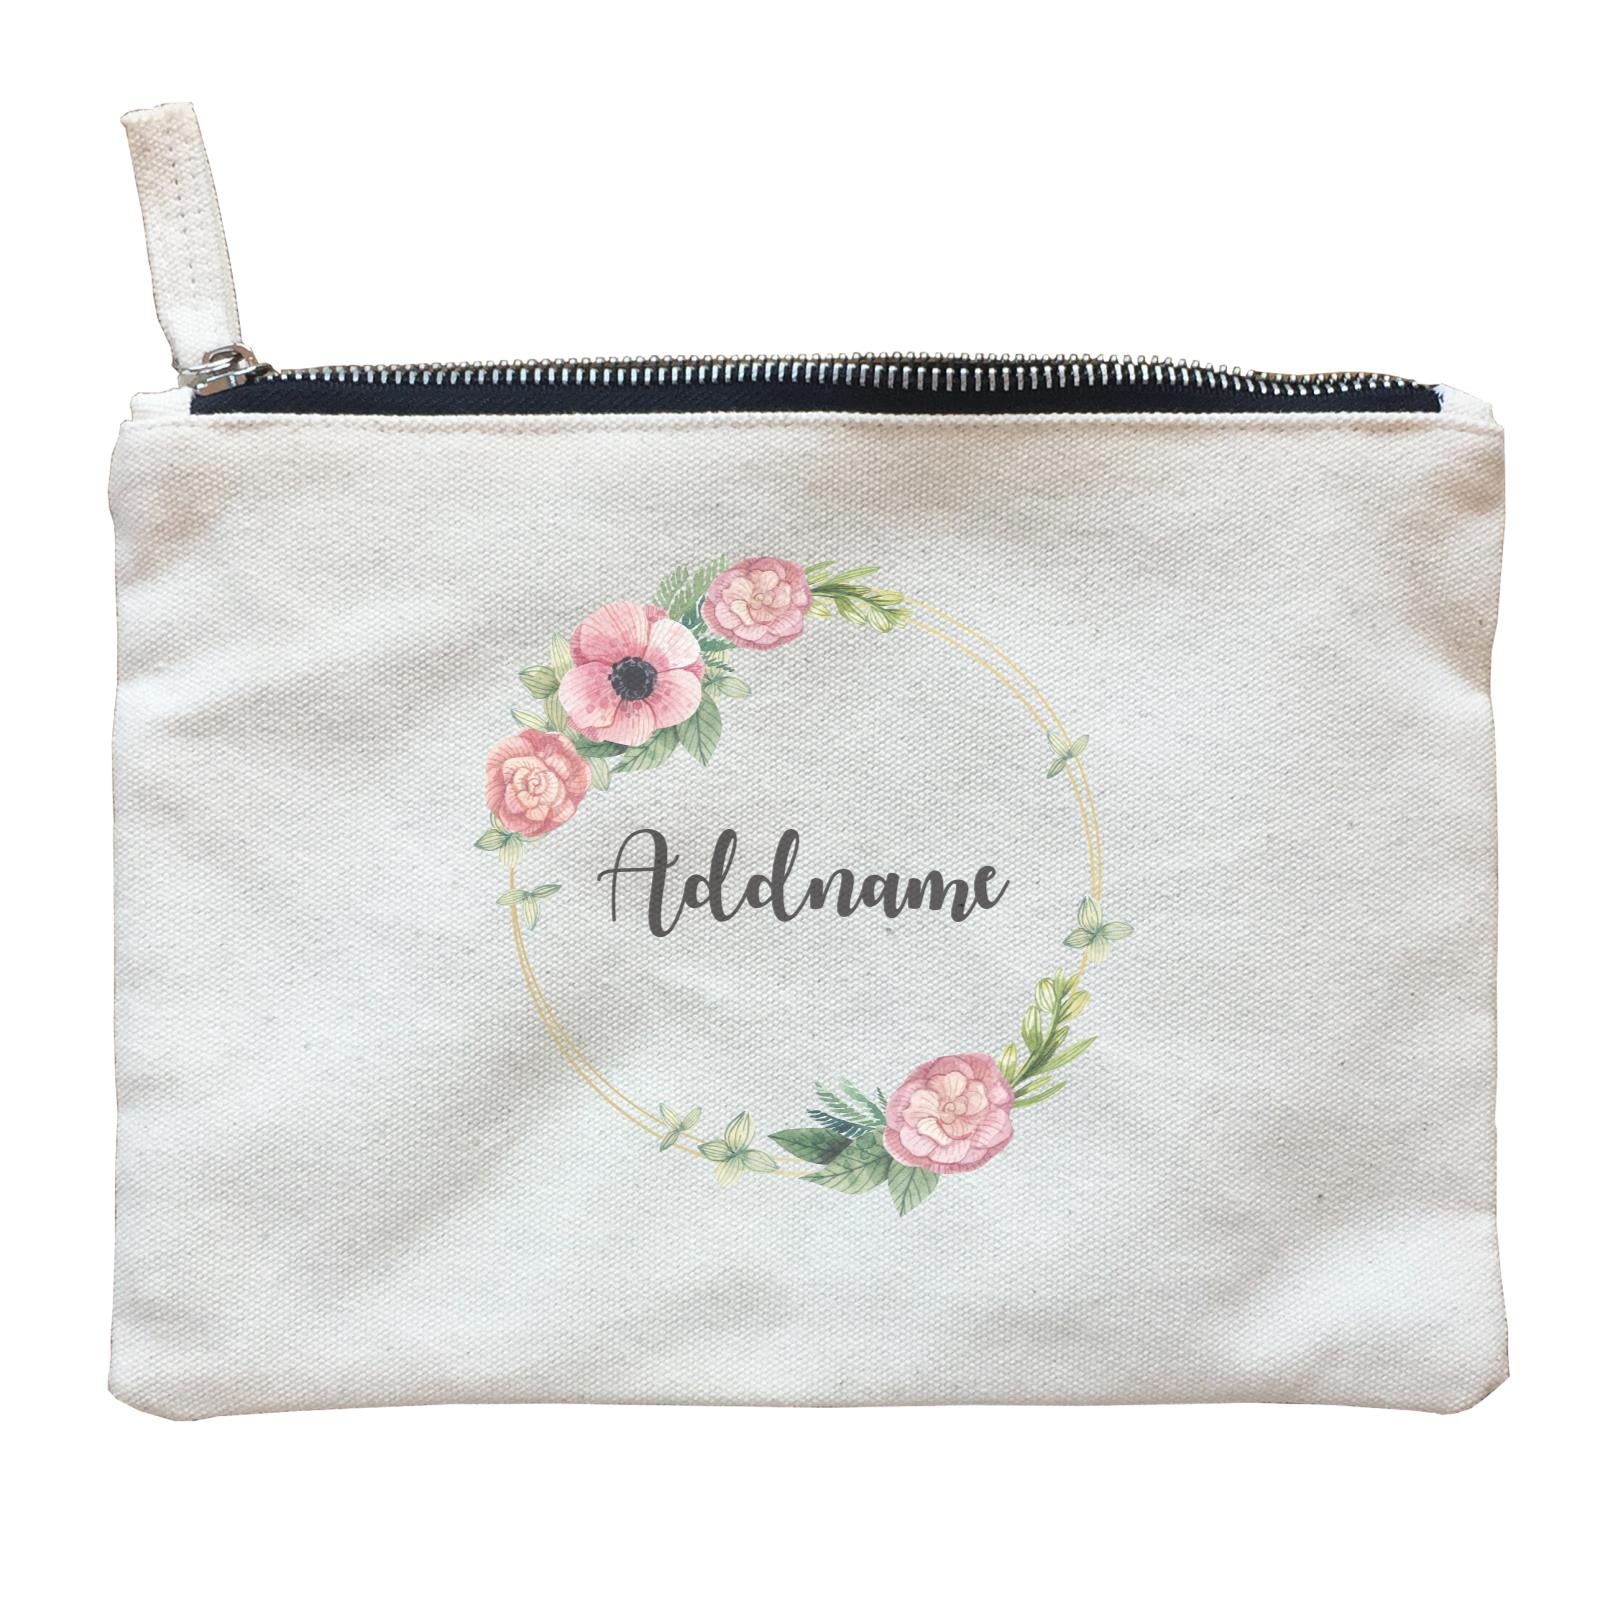 Floral Sweet Pink Flower Wreath With Circle Addname Zipper Pouch